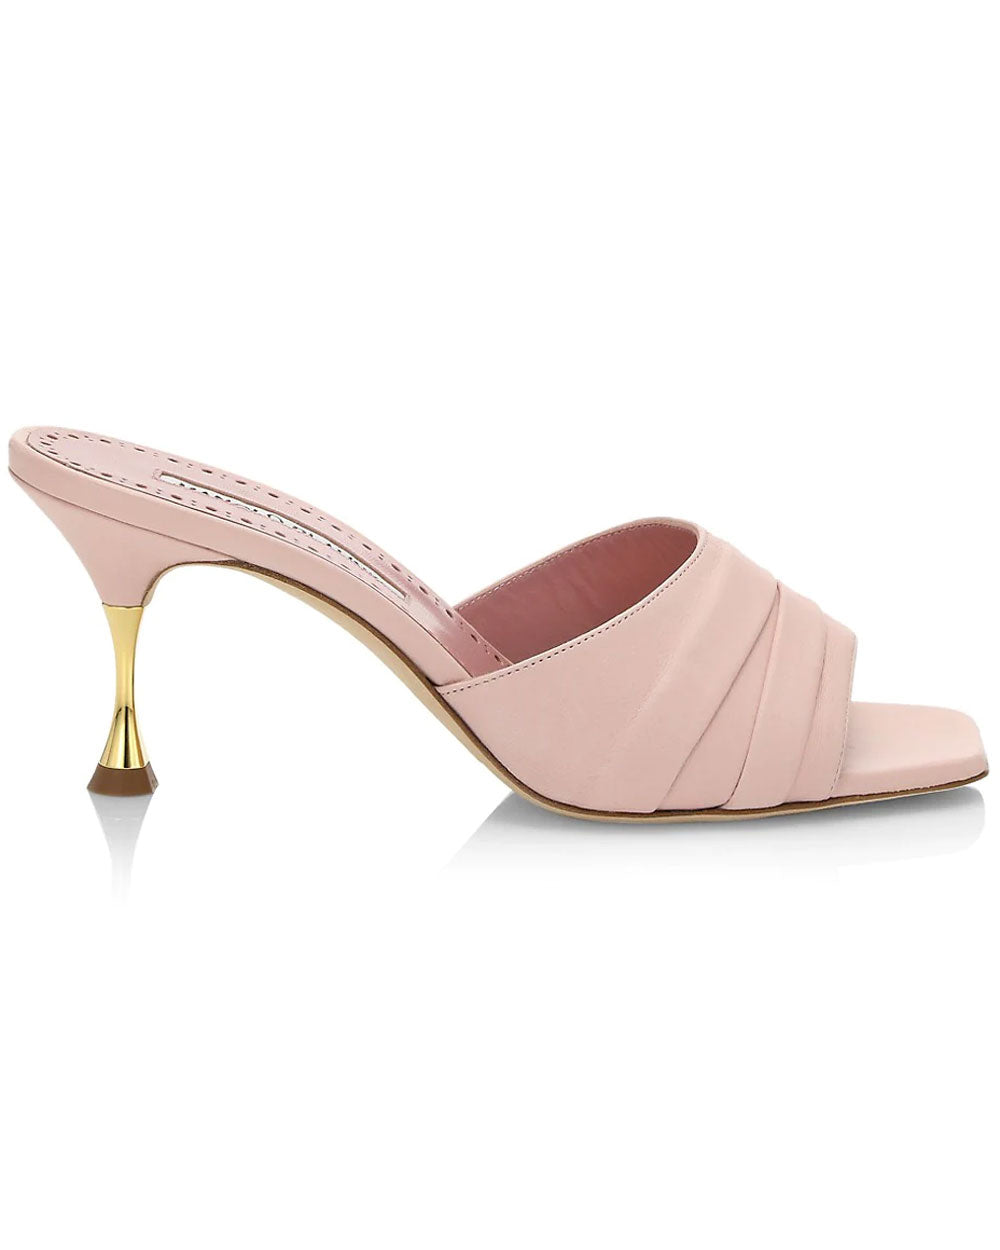 Picoux Sandal in Pink